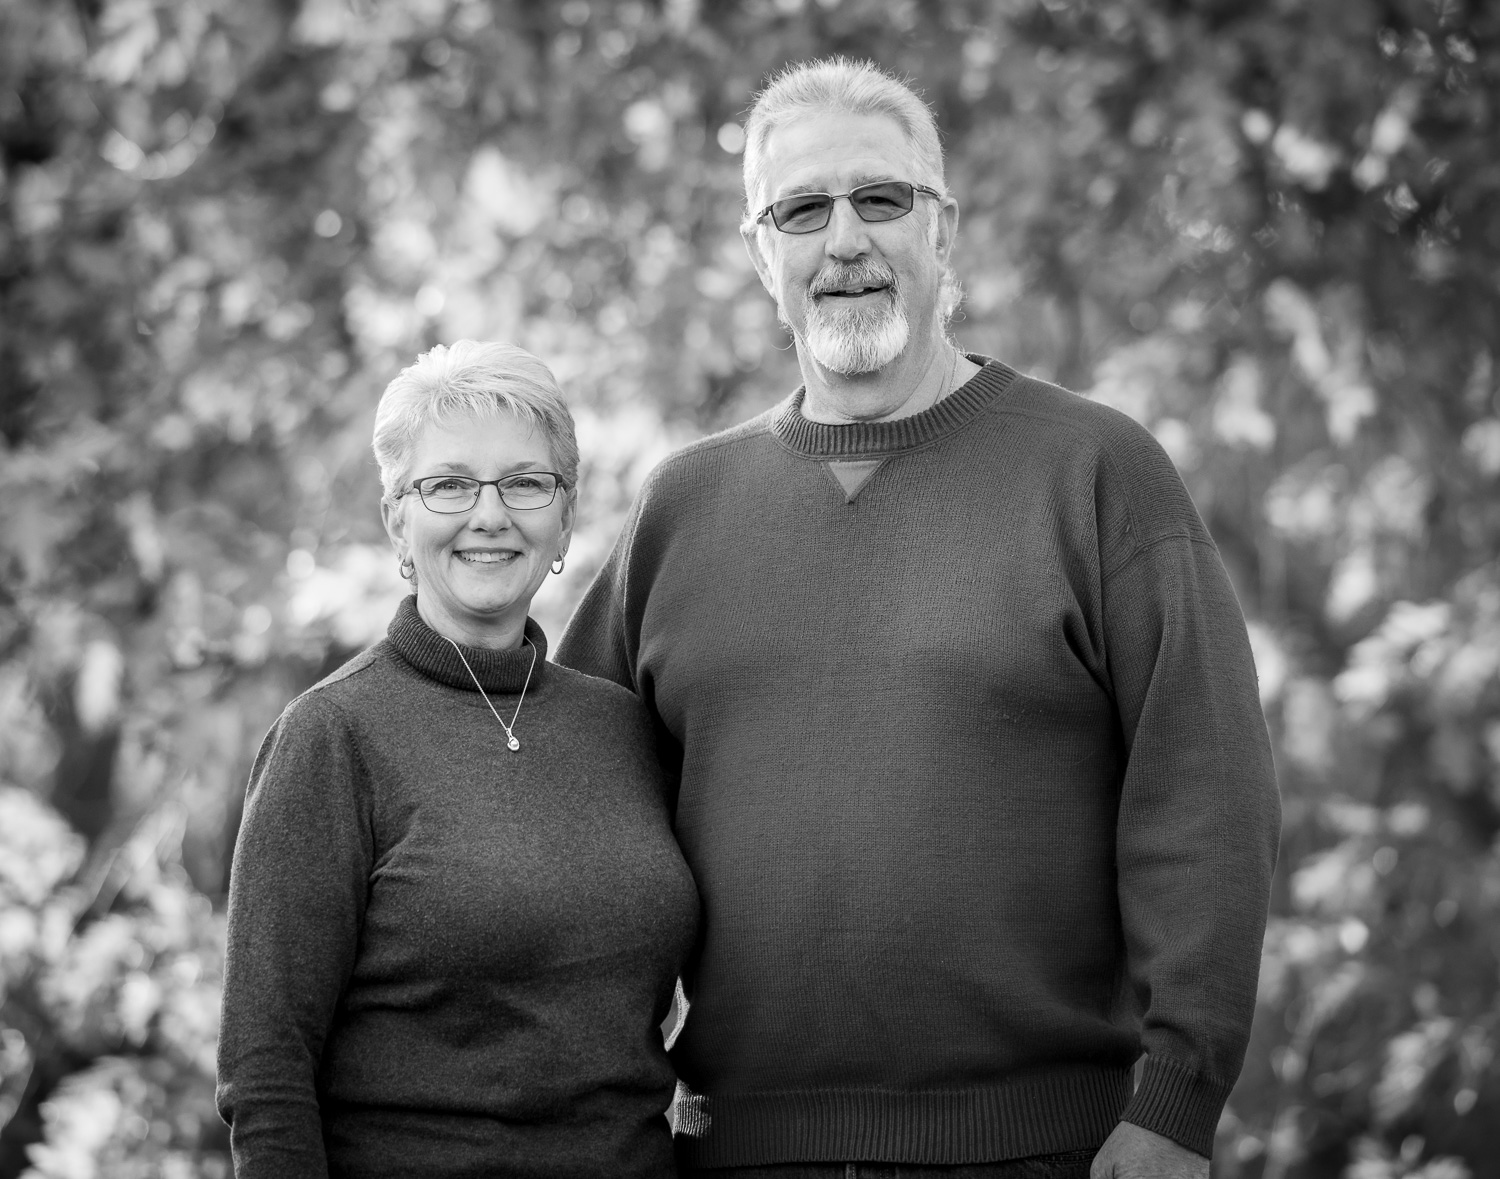 Black and white family photos. A gray-haired husband and wife standing next to each other in the forest.